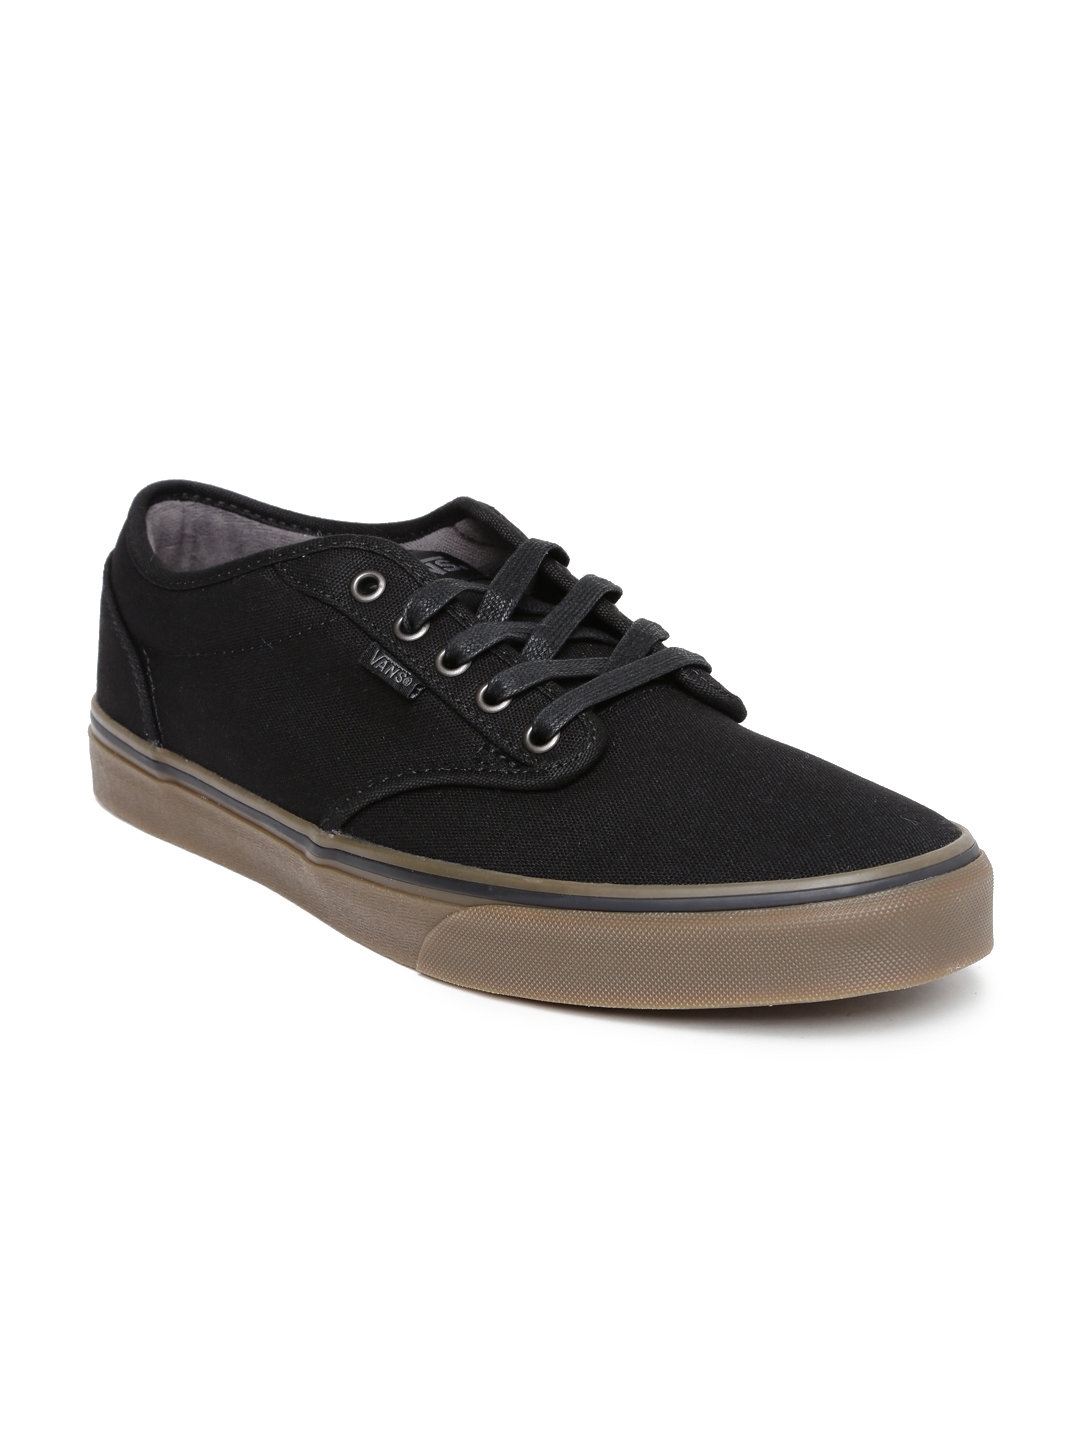 Buy Vans Unisex Black Solid Atwood Sneakers - Casual Shoes for Unisex ...